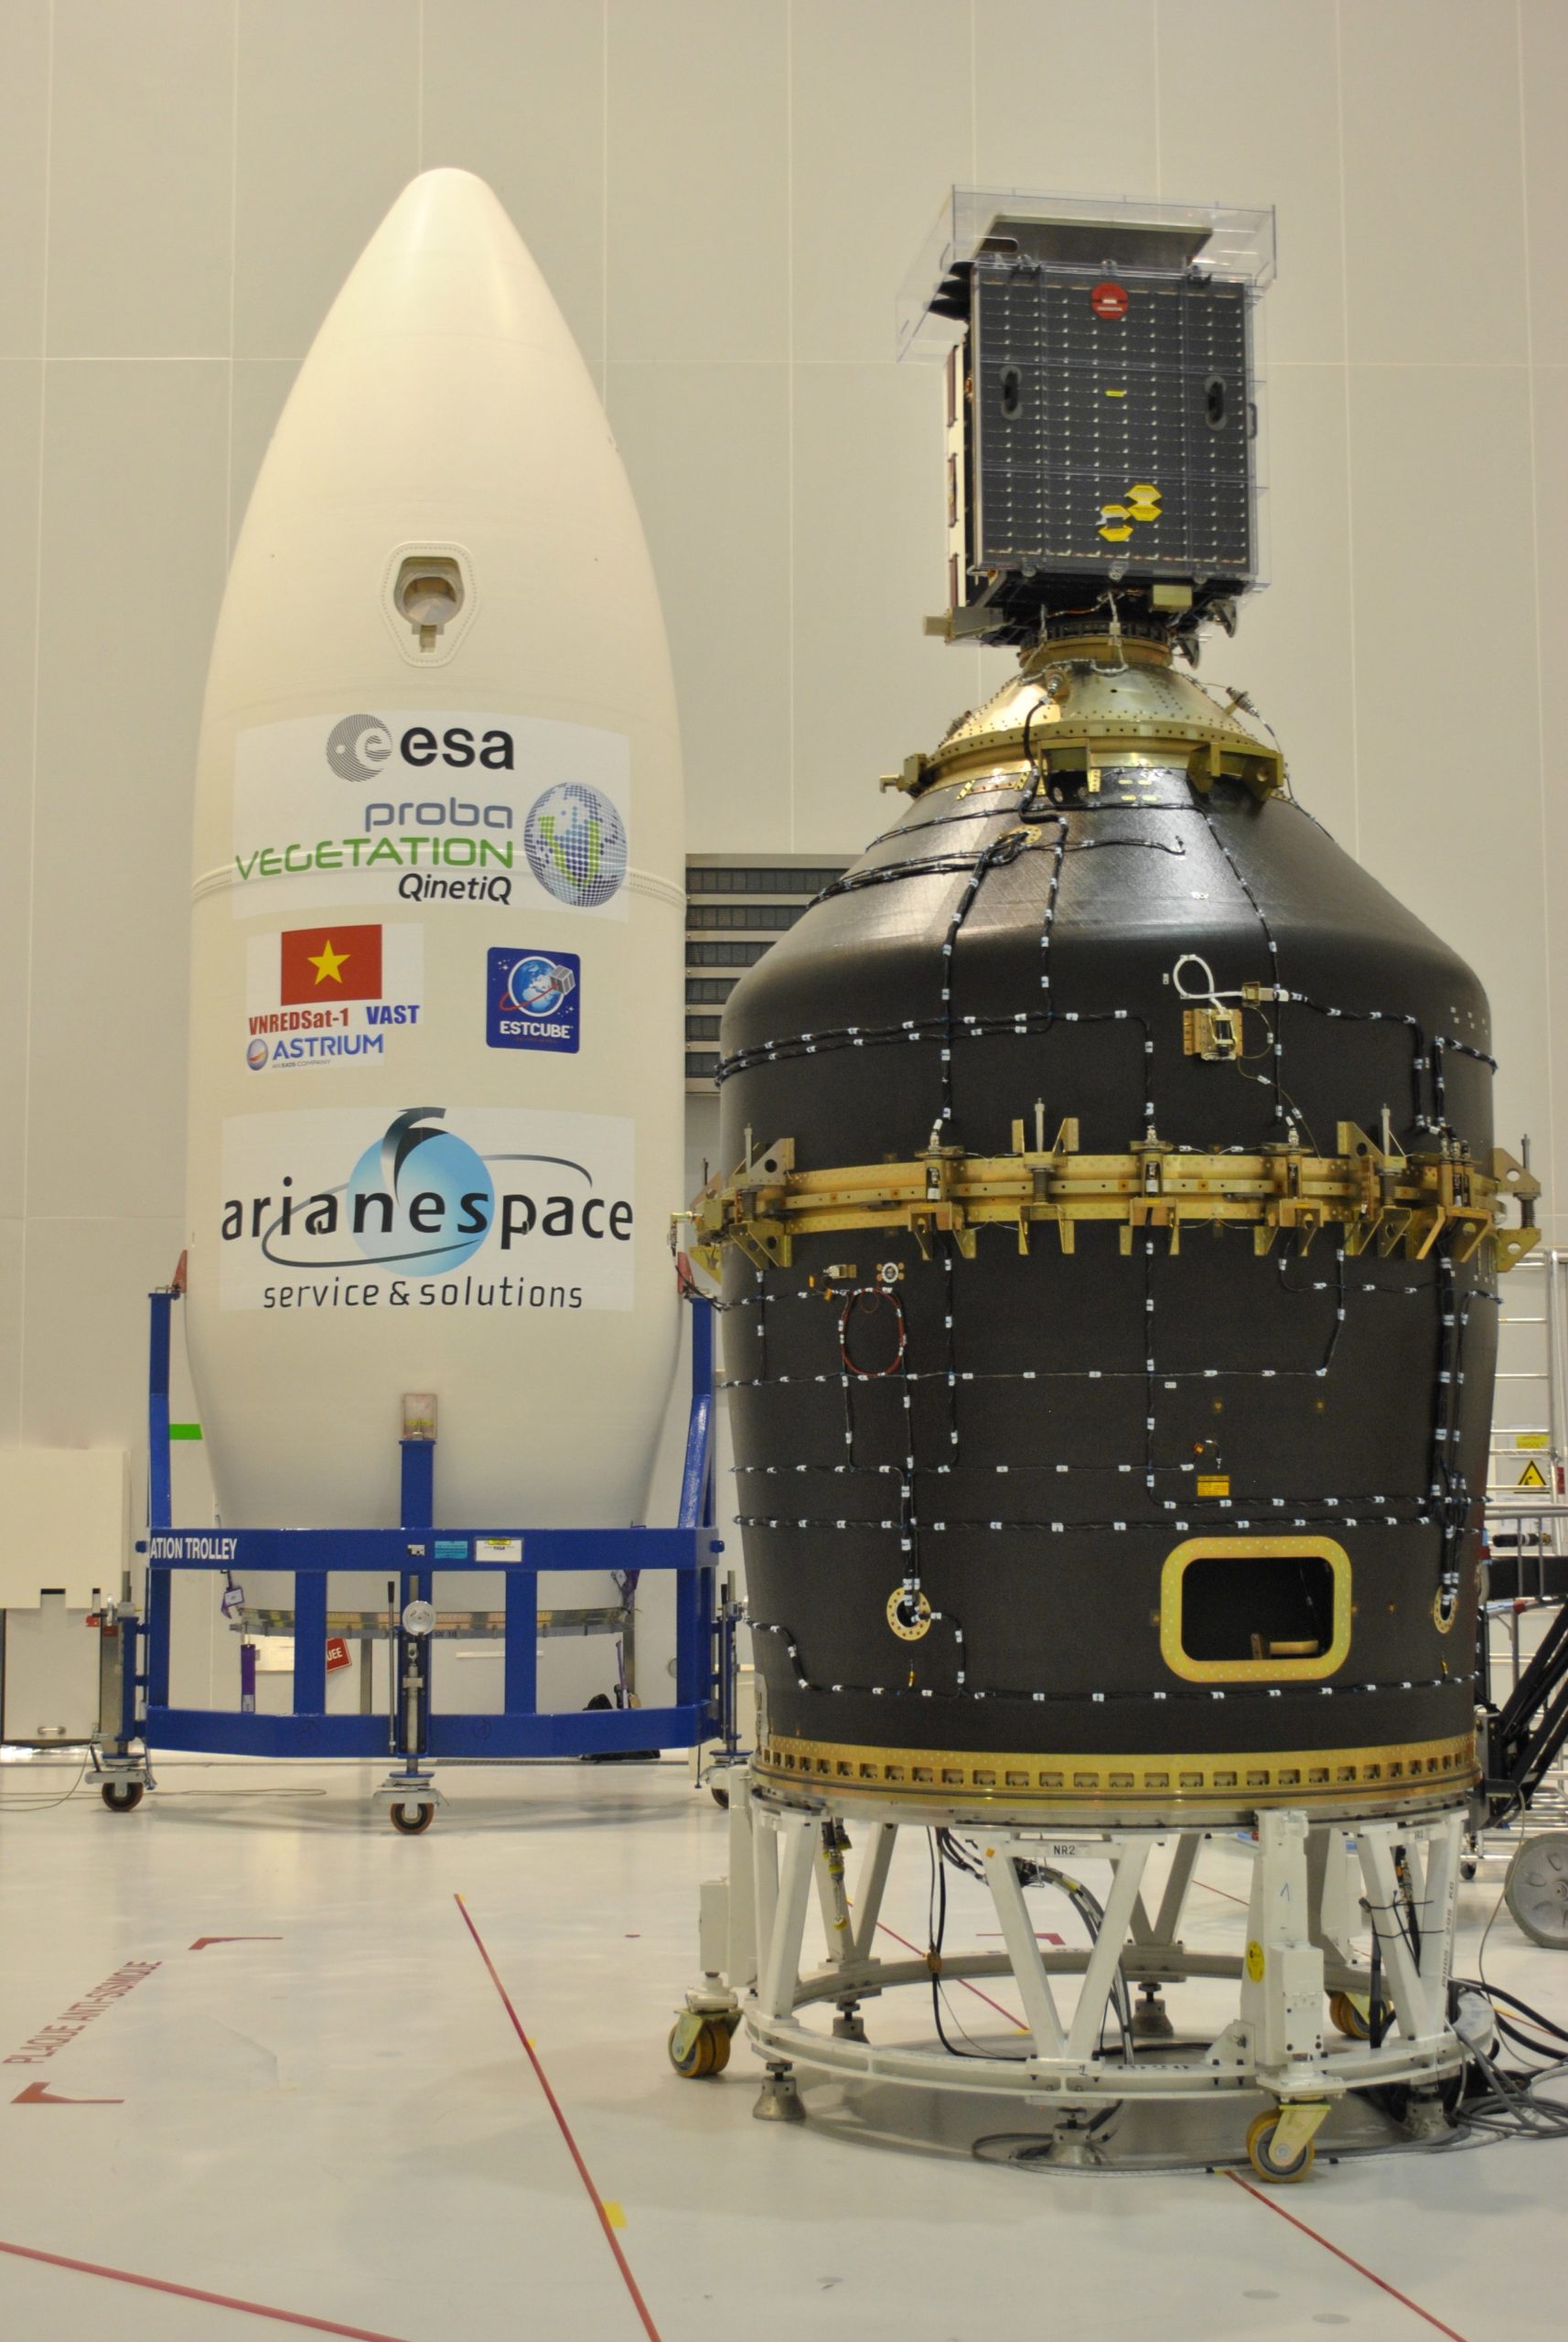 Archival image from 2013 showing the Vespa (Vega Secondary Payload Adaptor) adaptor in the background, with the Proba-V satellite in the foreground.  (Image: ESA - Karim Mellab)